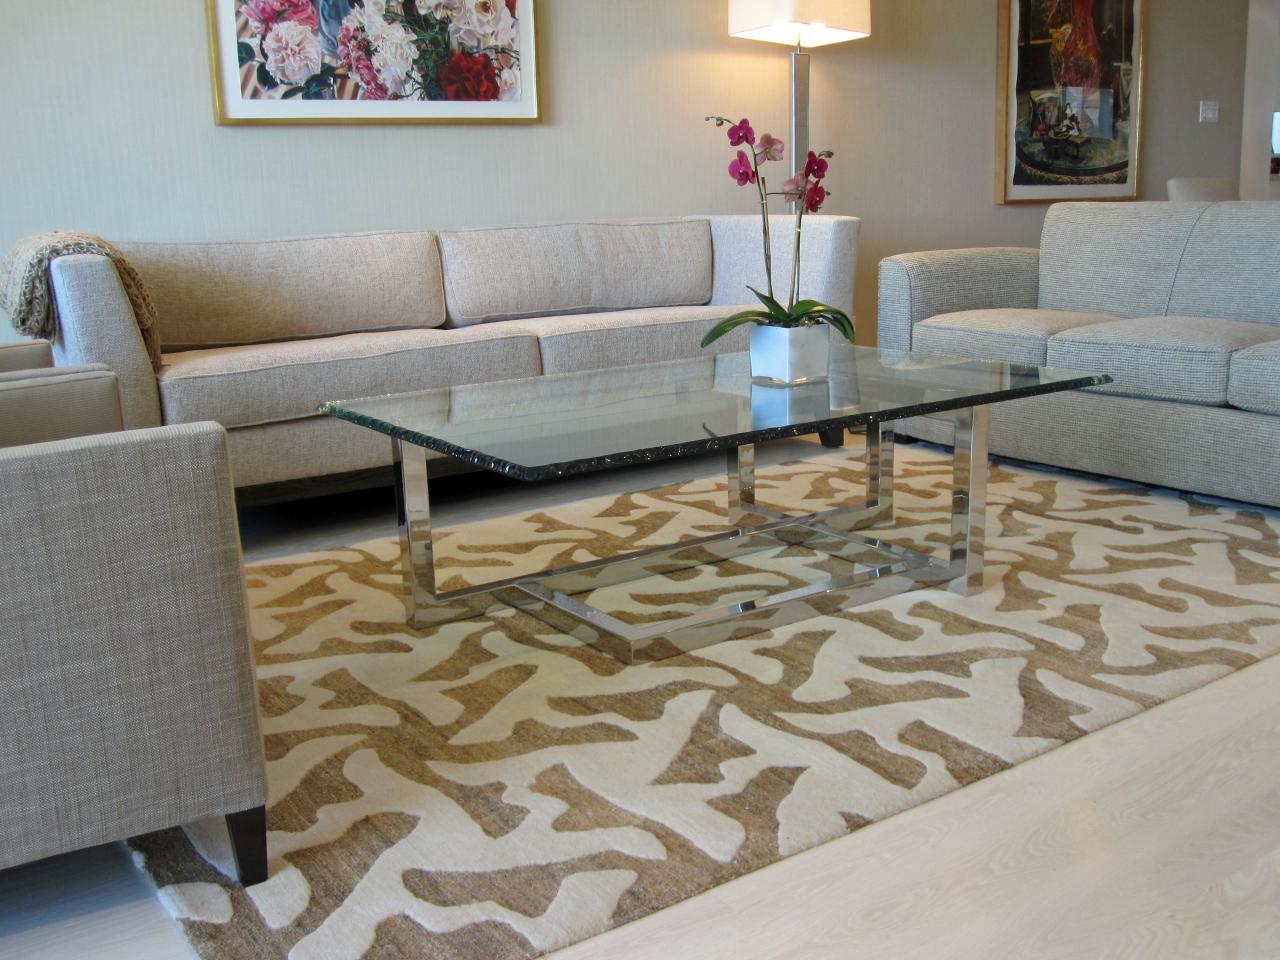 Choosing The Best Area Rug For Your, Sizes Of Area Rugs For Living Room